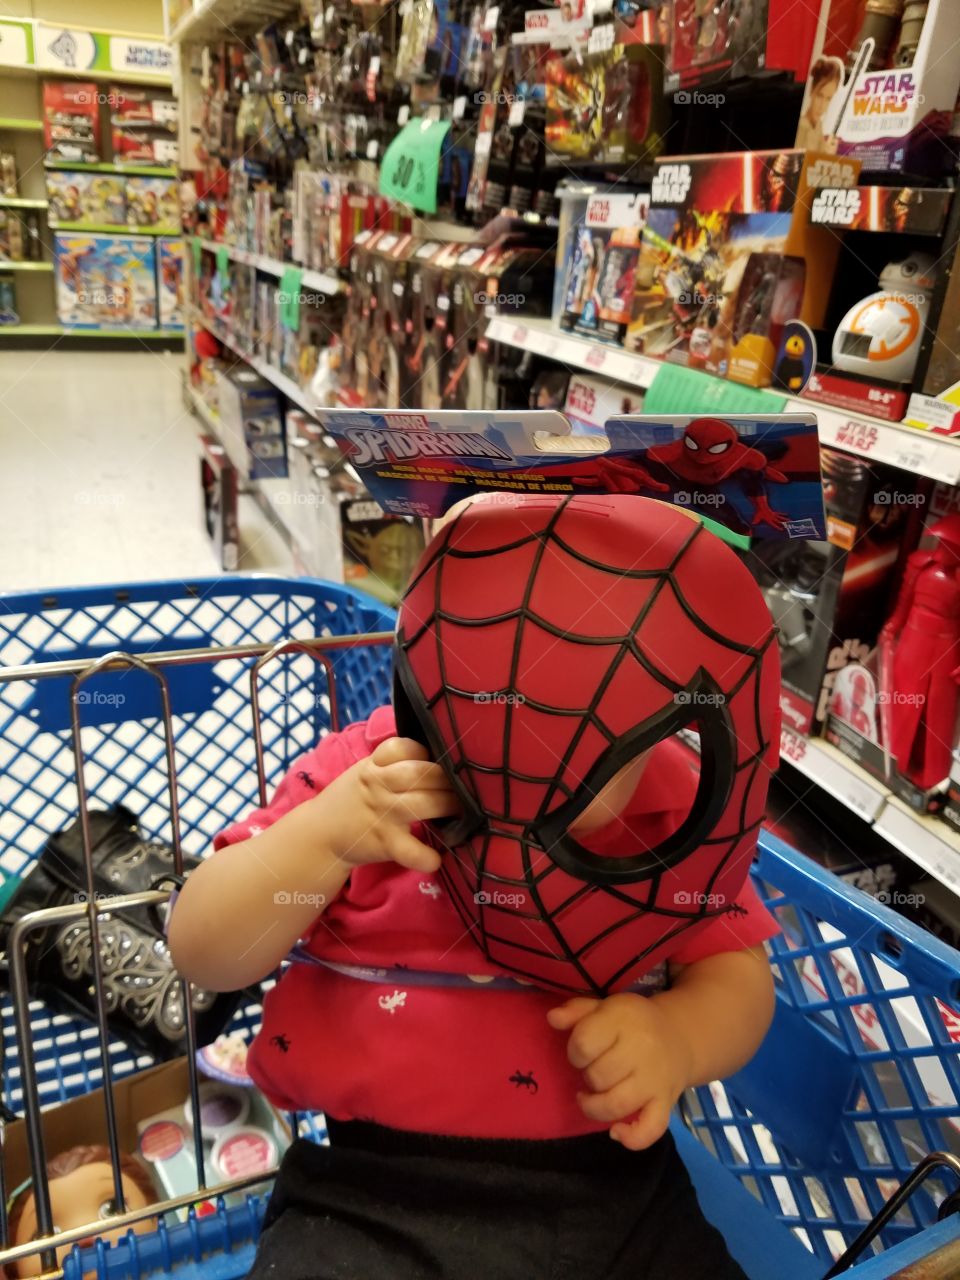 trying on the spider man mask